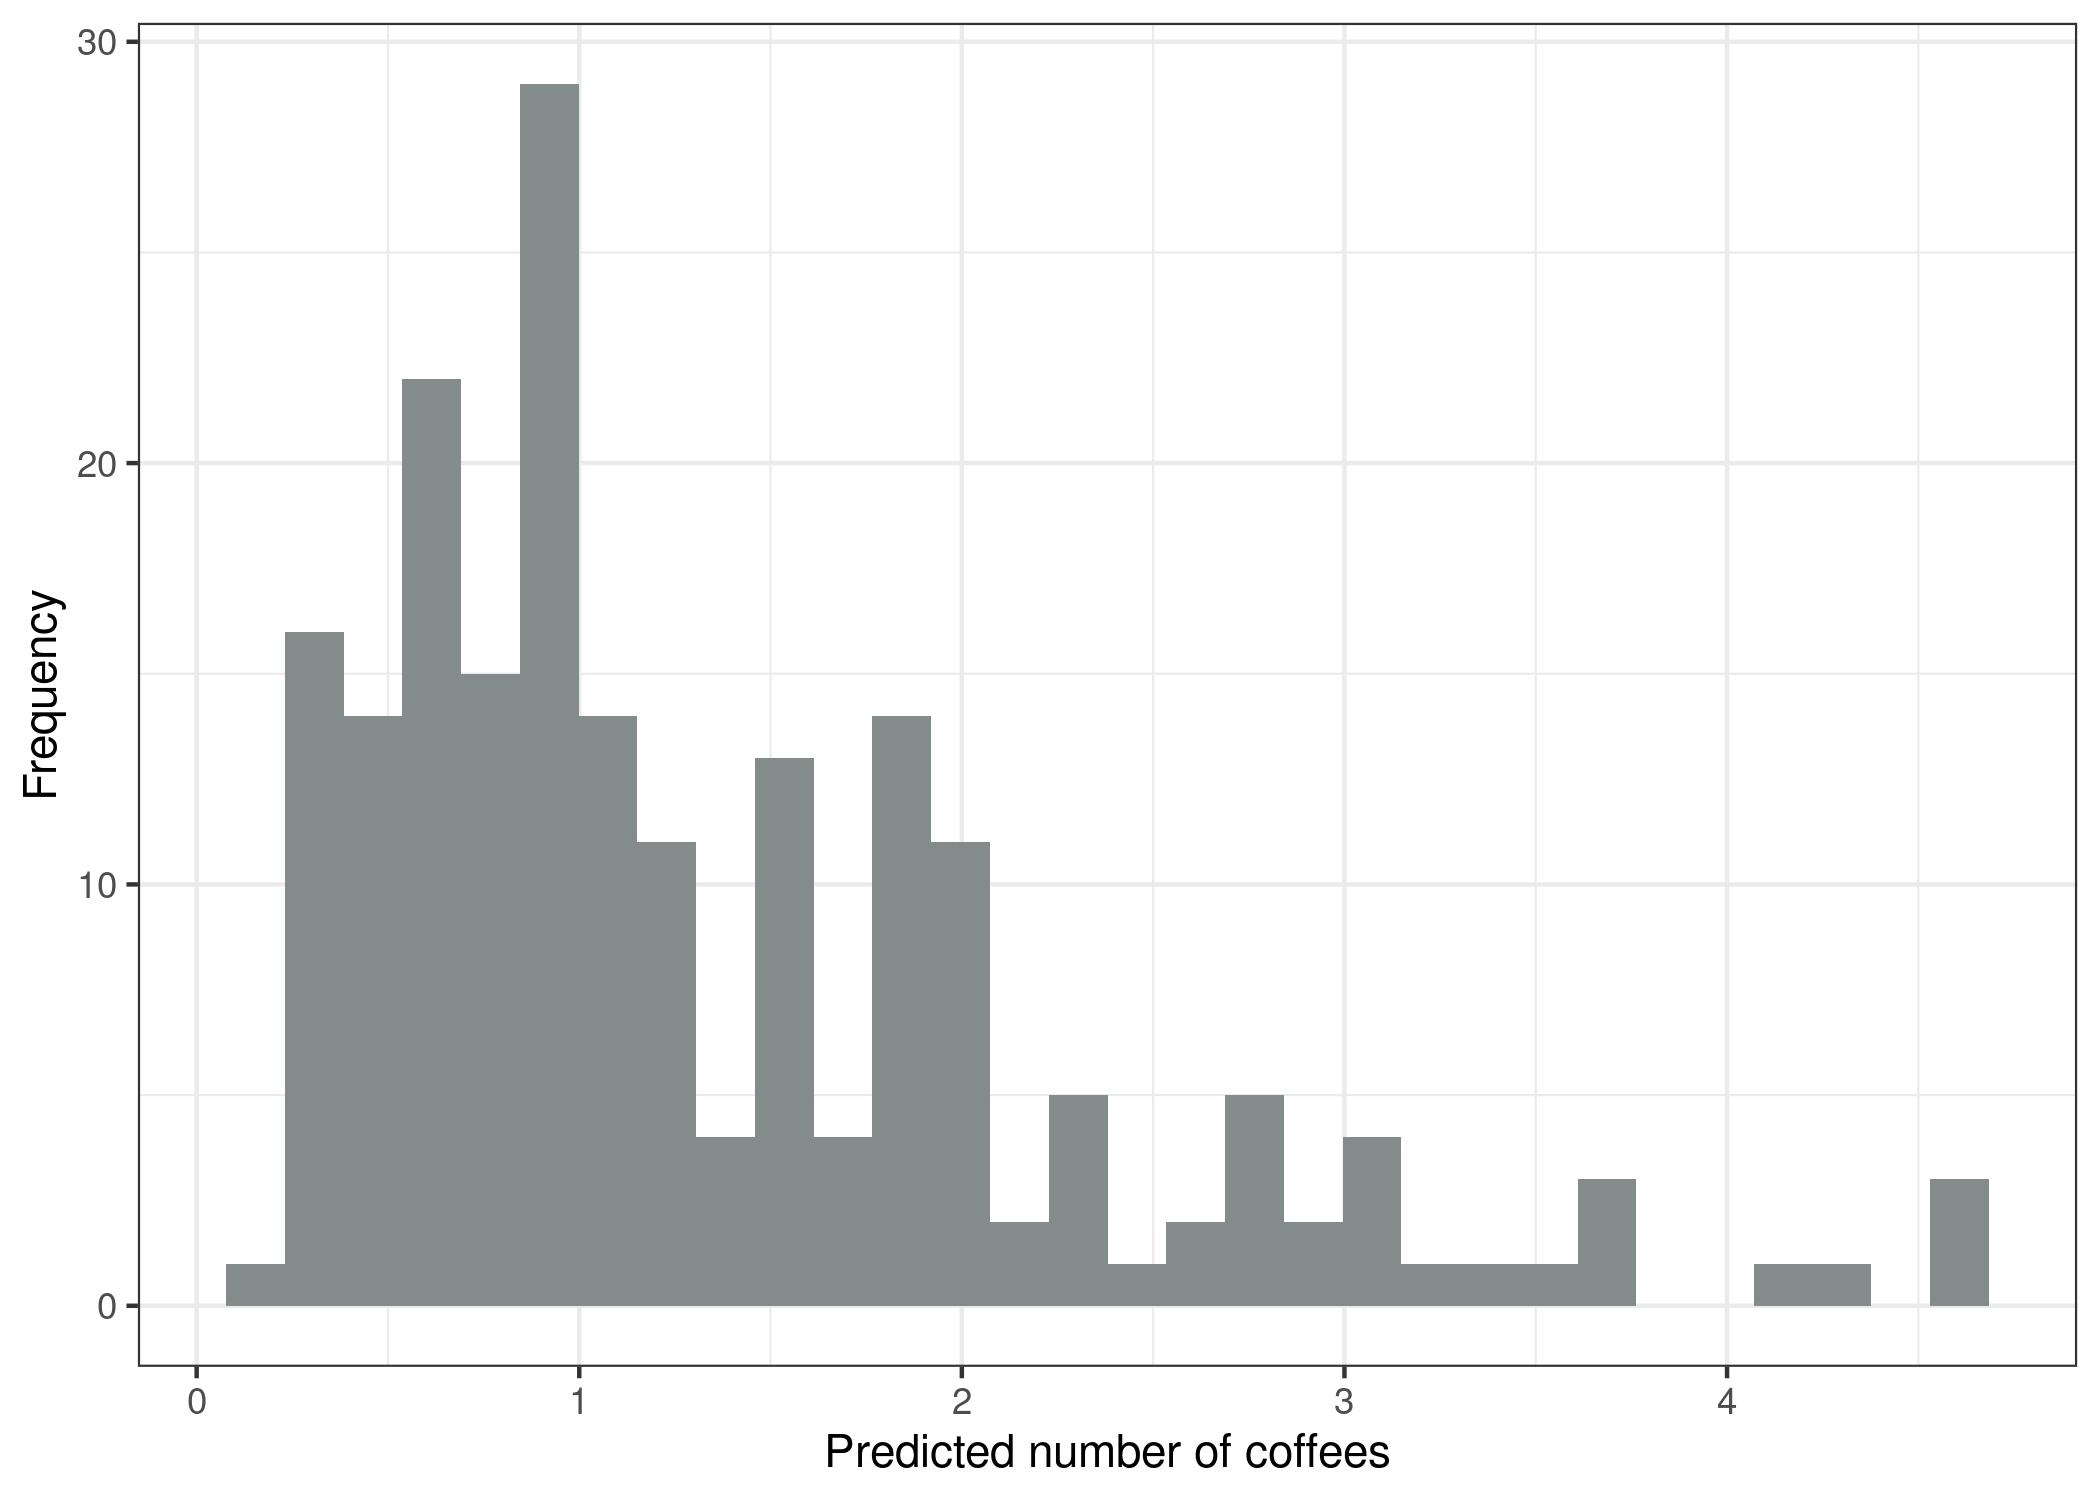 Predicted number of coffees dependent on stress, sleep and work. The GLM with Poisson assumption and log link is an appropriate model for this dataset.